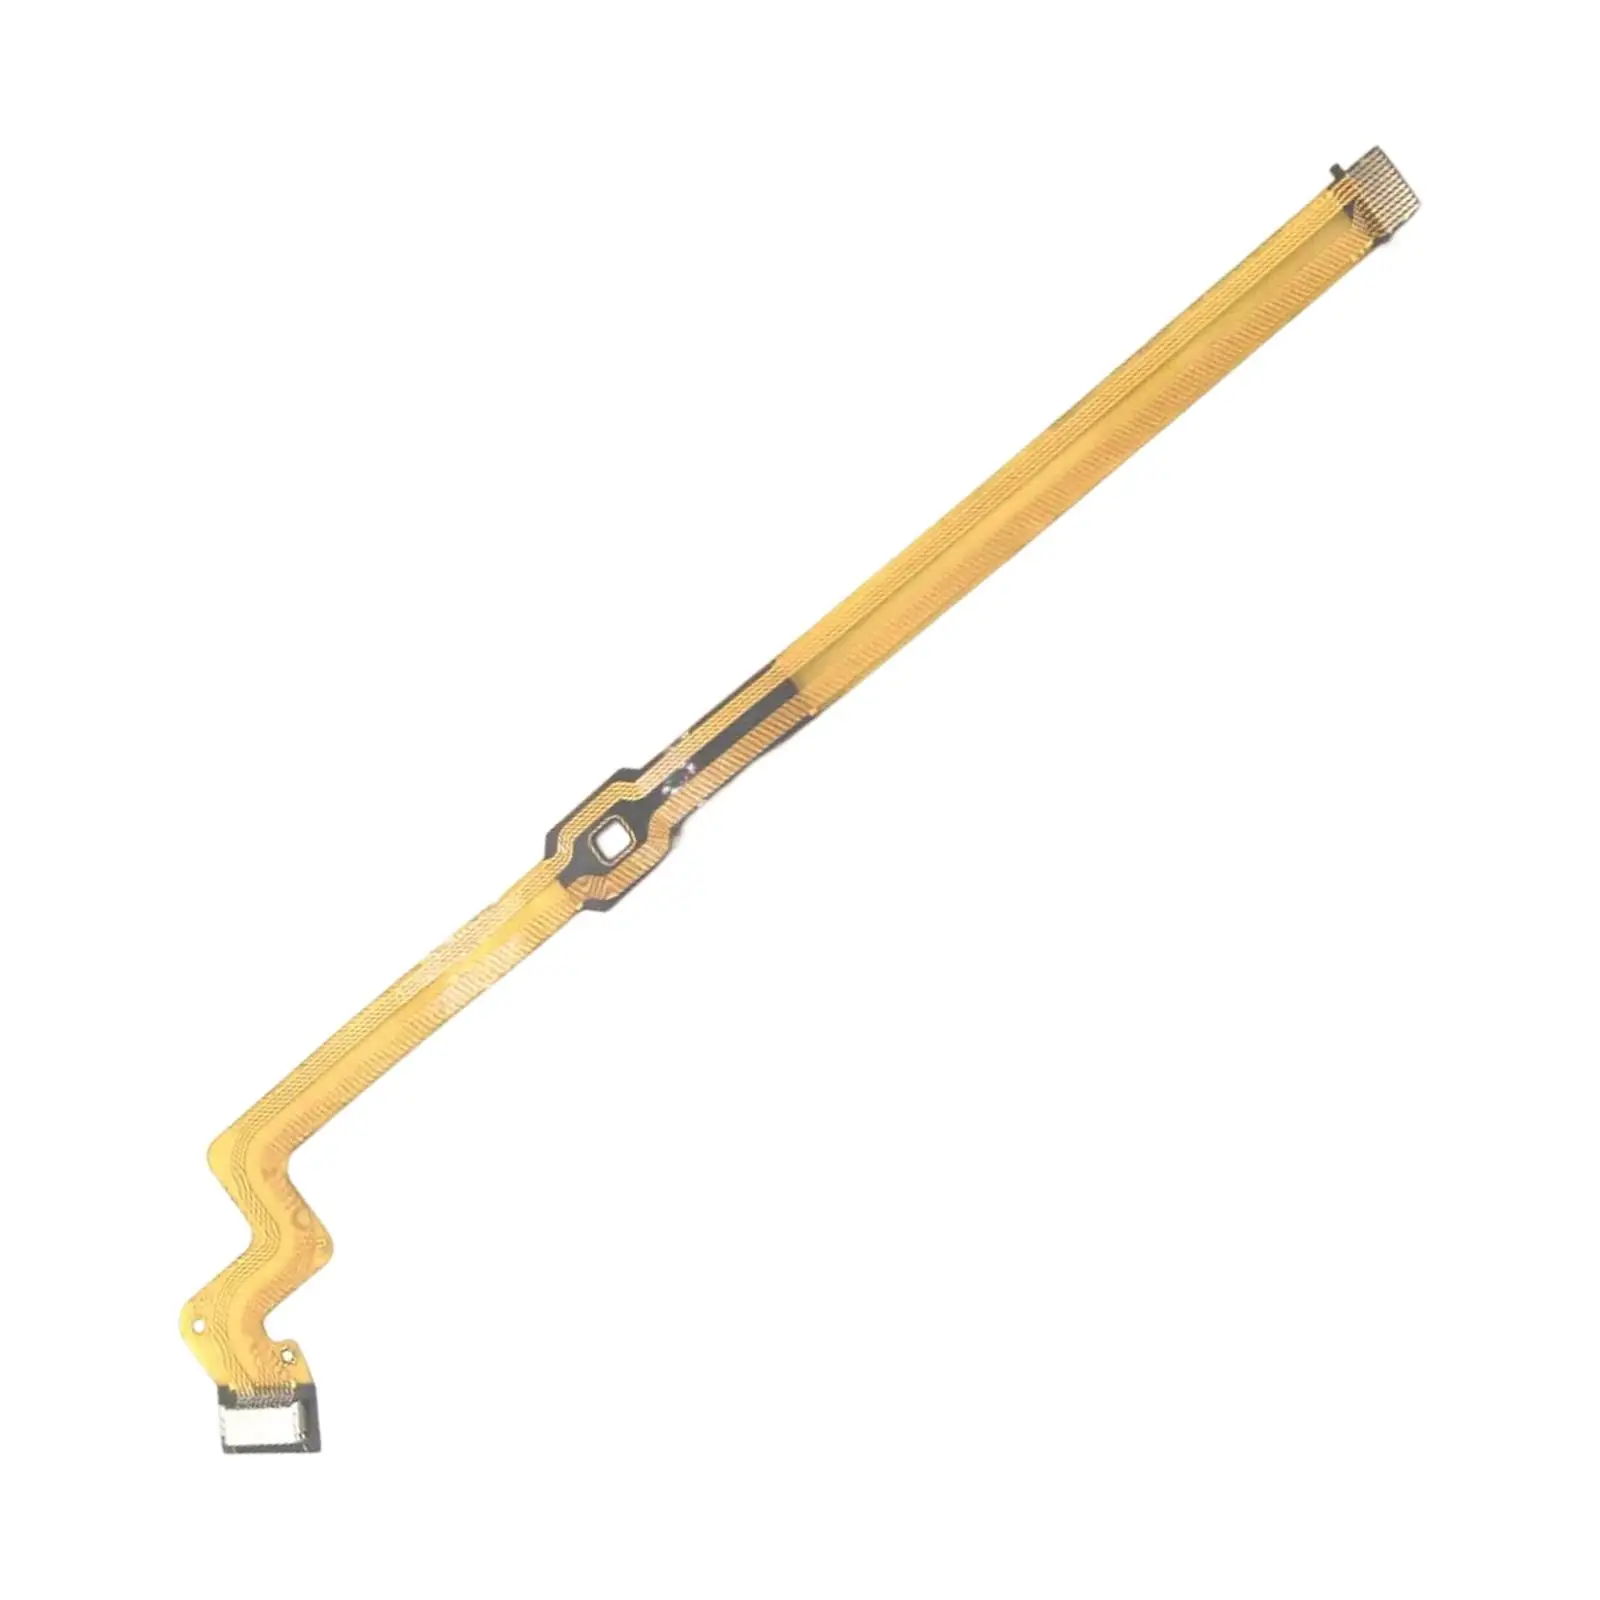 Digital Camera Lens Flex Cable Anti SHAKE Cable Part High Quality Fpc Repair Lens Line for 55-200mm Accessory